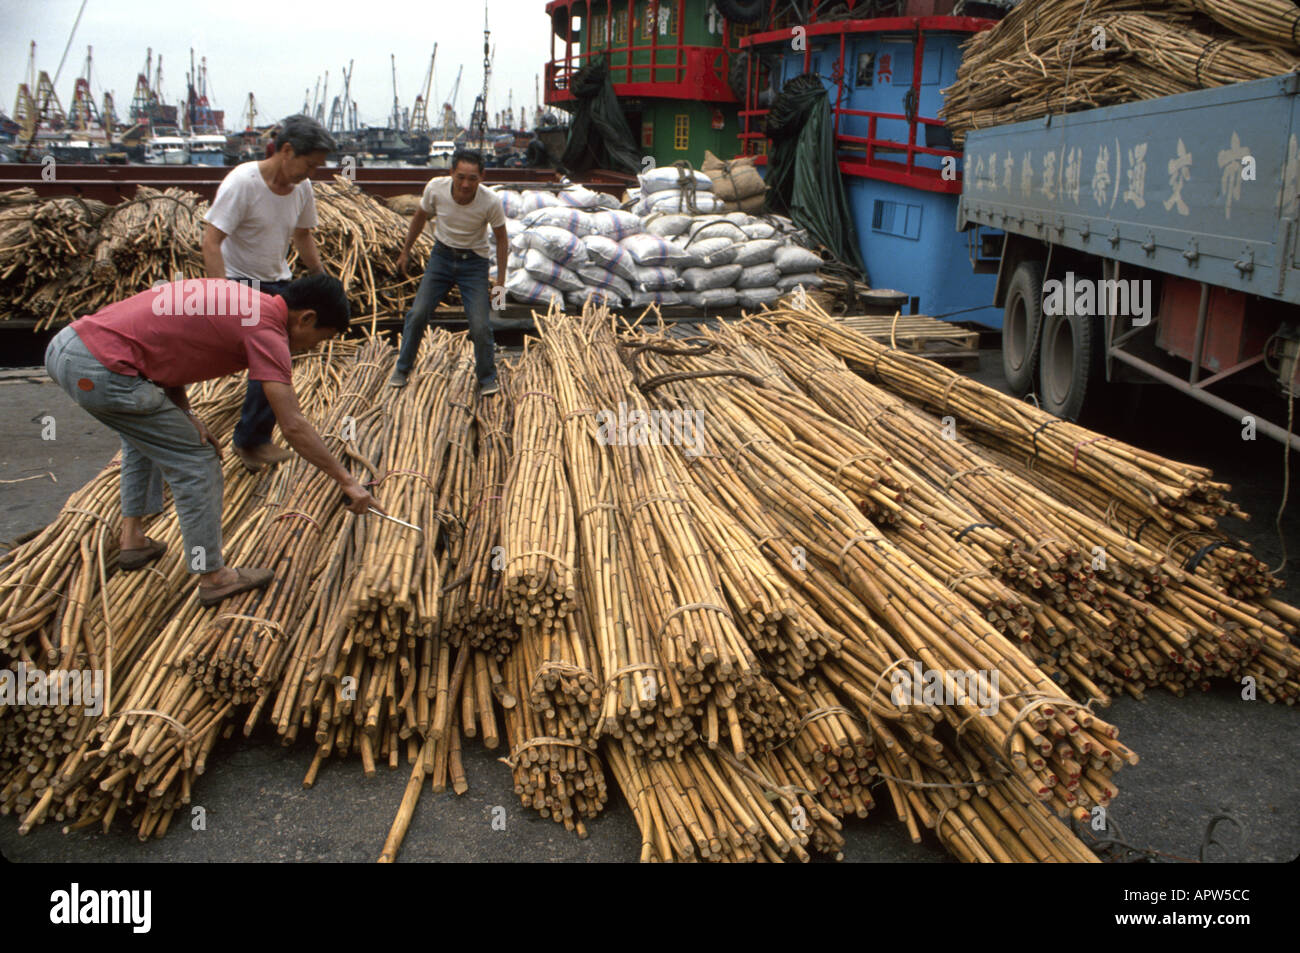 Hong Kong,China Chinese Asian Orient,communism,communist,Typhoon Harbor,harbour,bundled bamboo poles,dock workers,boats,HongKong Stock Photo